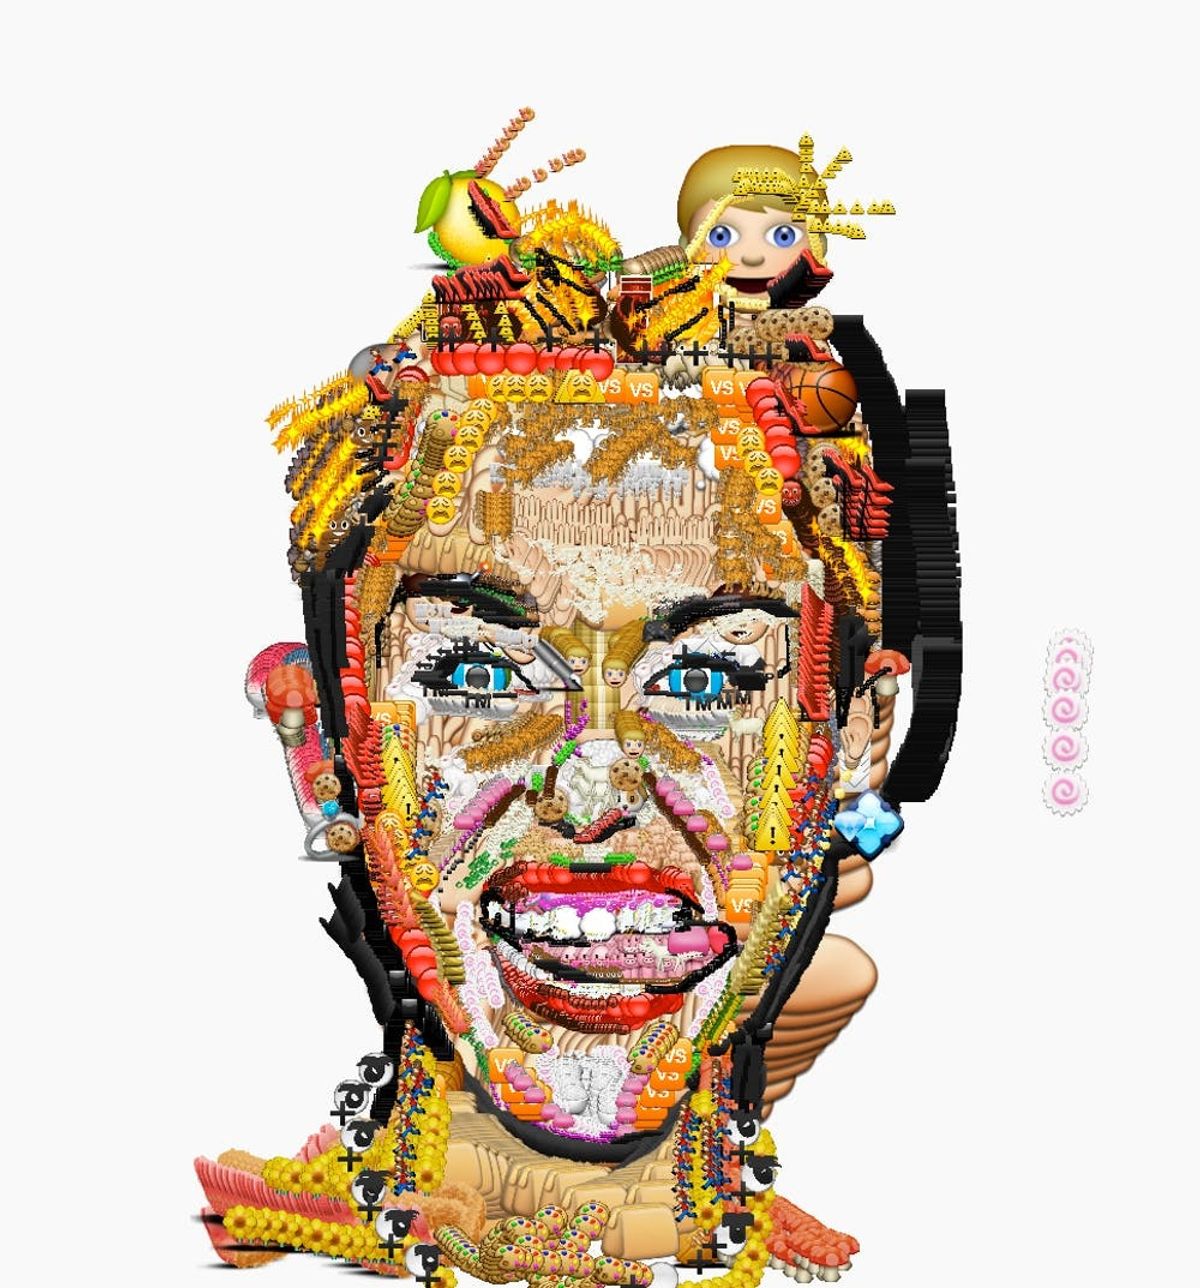 These Celebrity Emoji Makeovers Are Kind of the Best Thing Ever